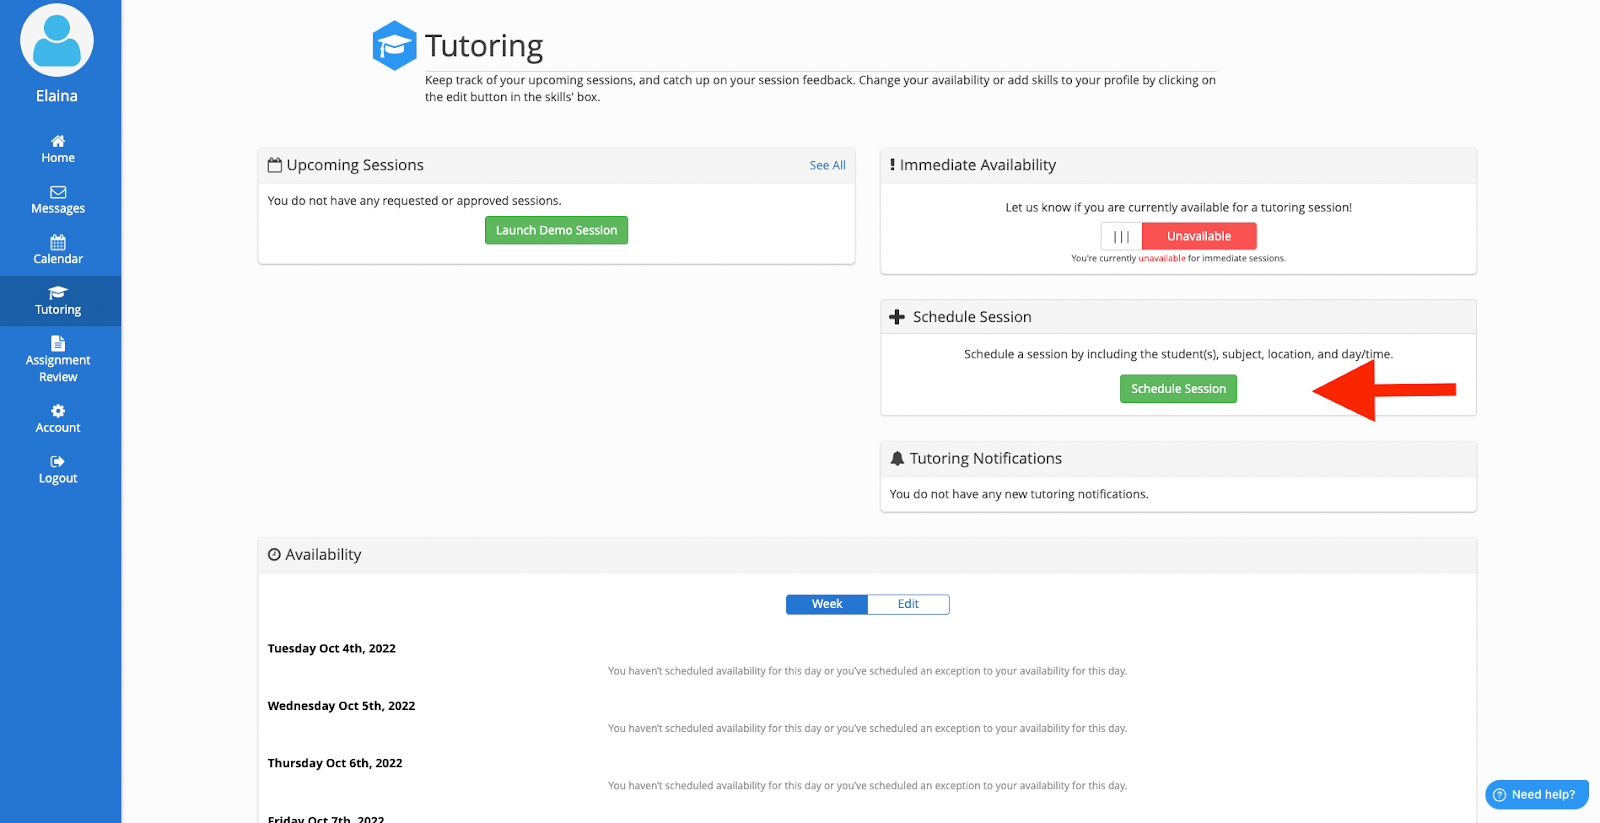 Screenshot of the tutoring dashboard that shows where a tutor can schedule a session